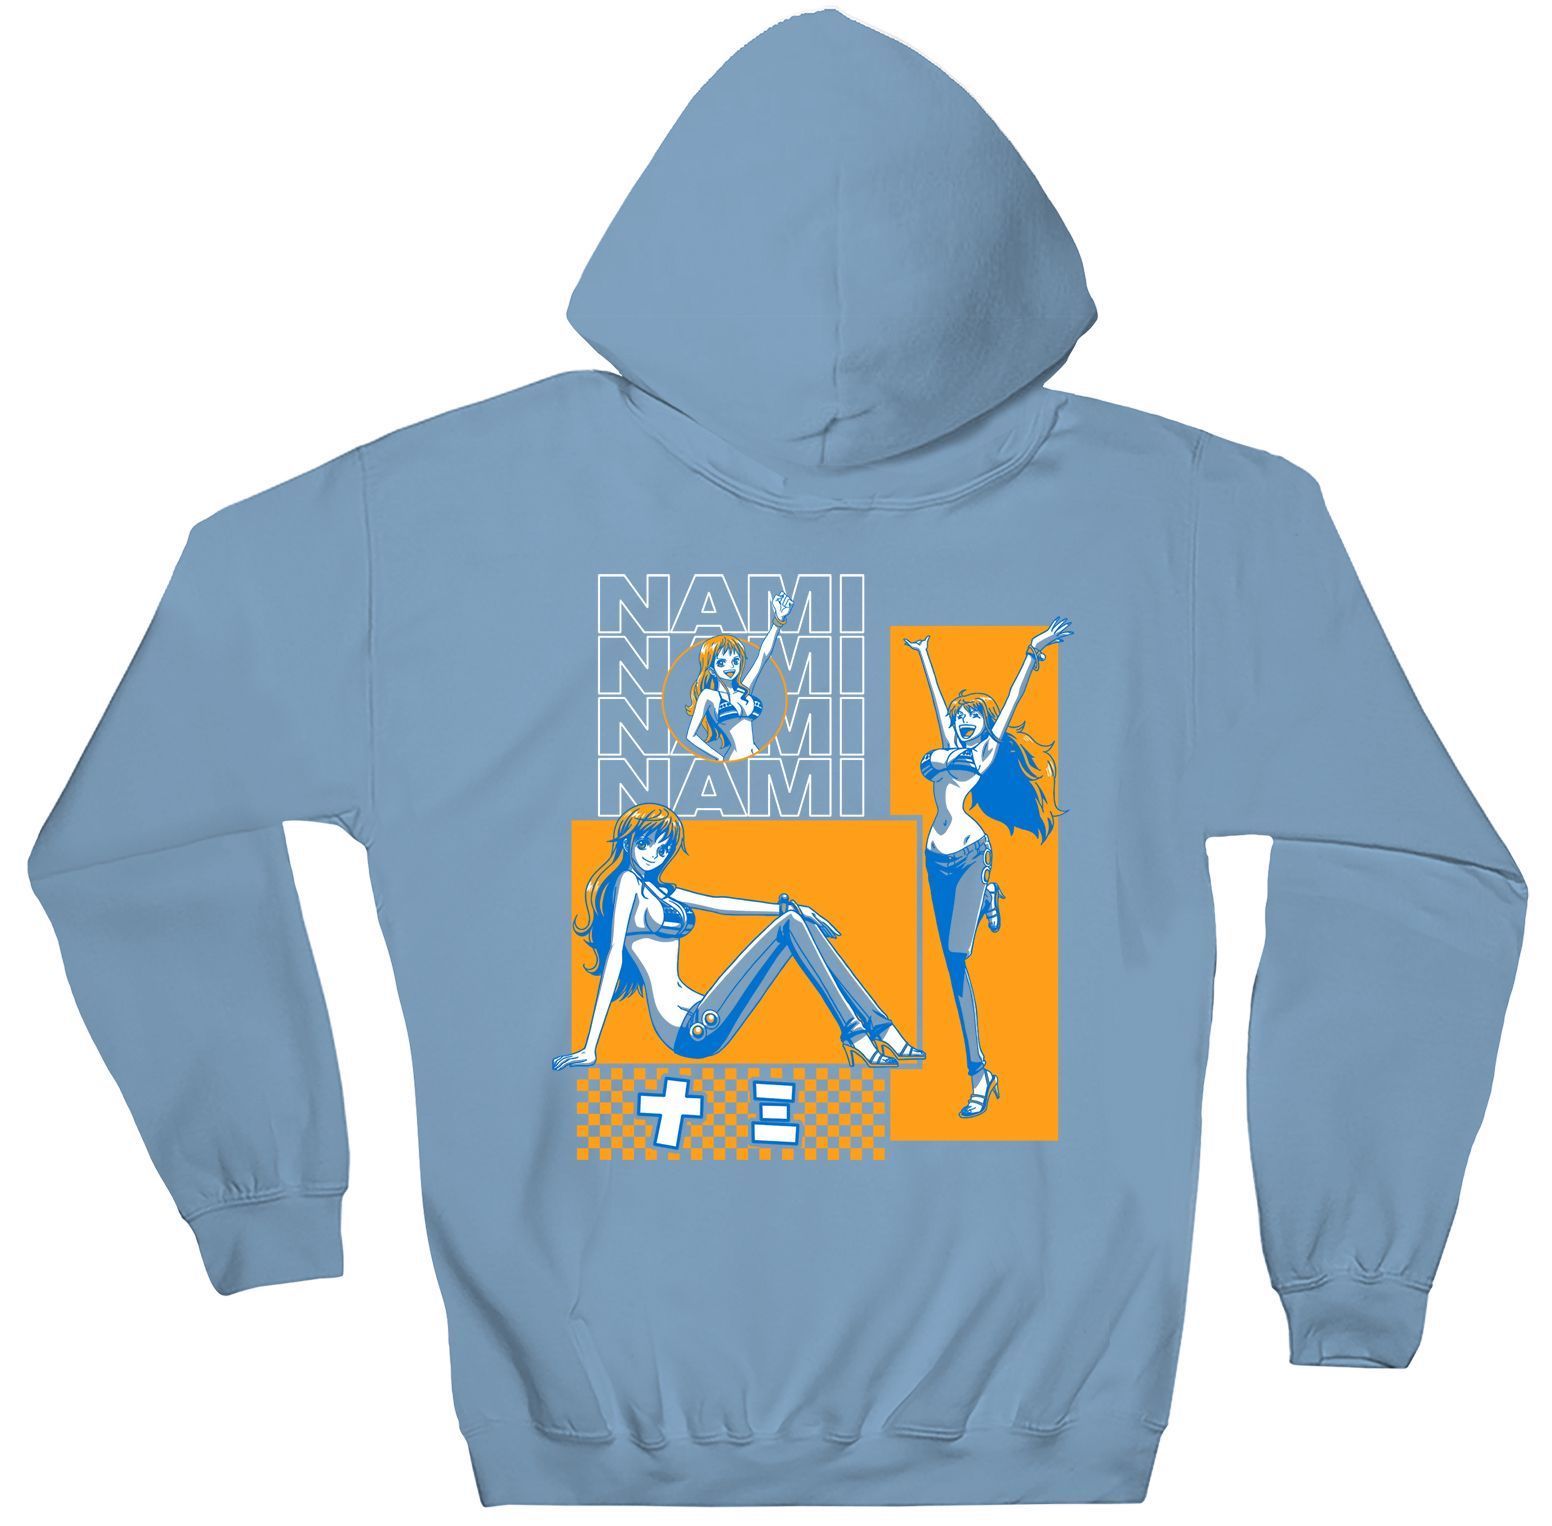 One Piece - Nami Panels Hoodie - Crunchyroll Exclusive! image count 0